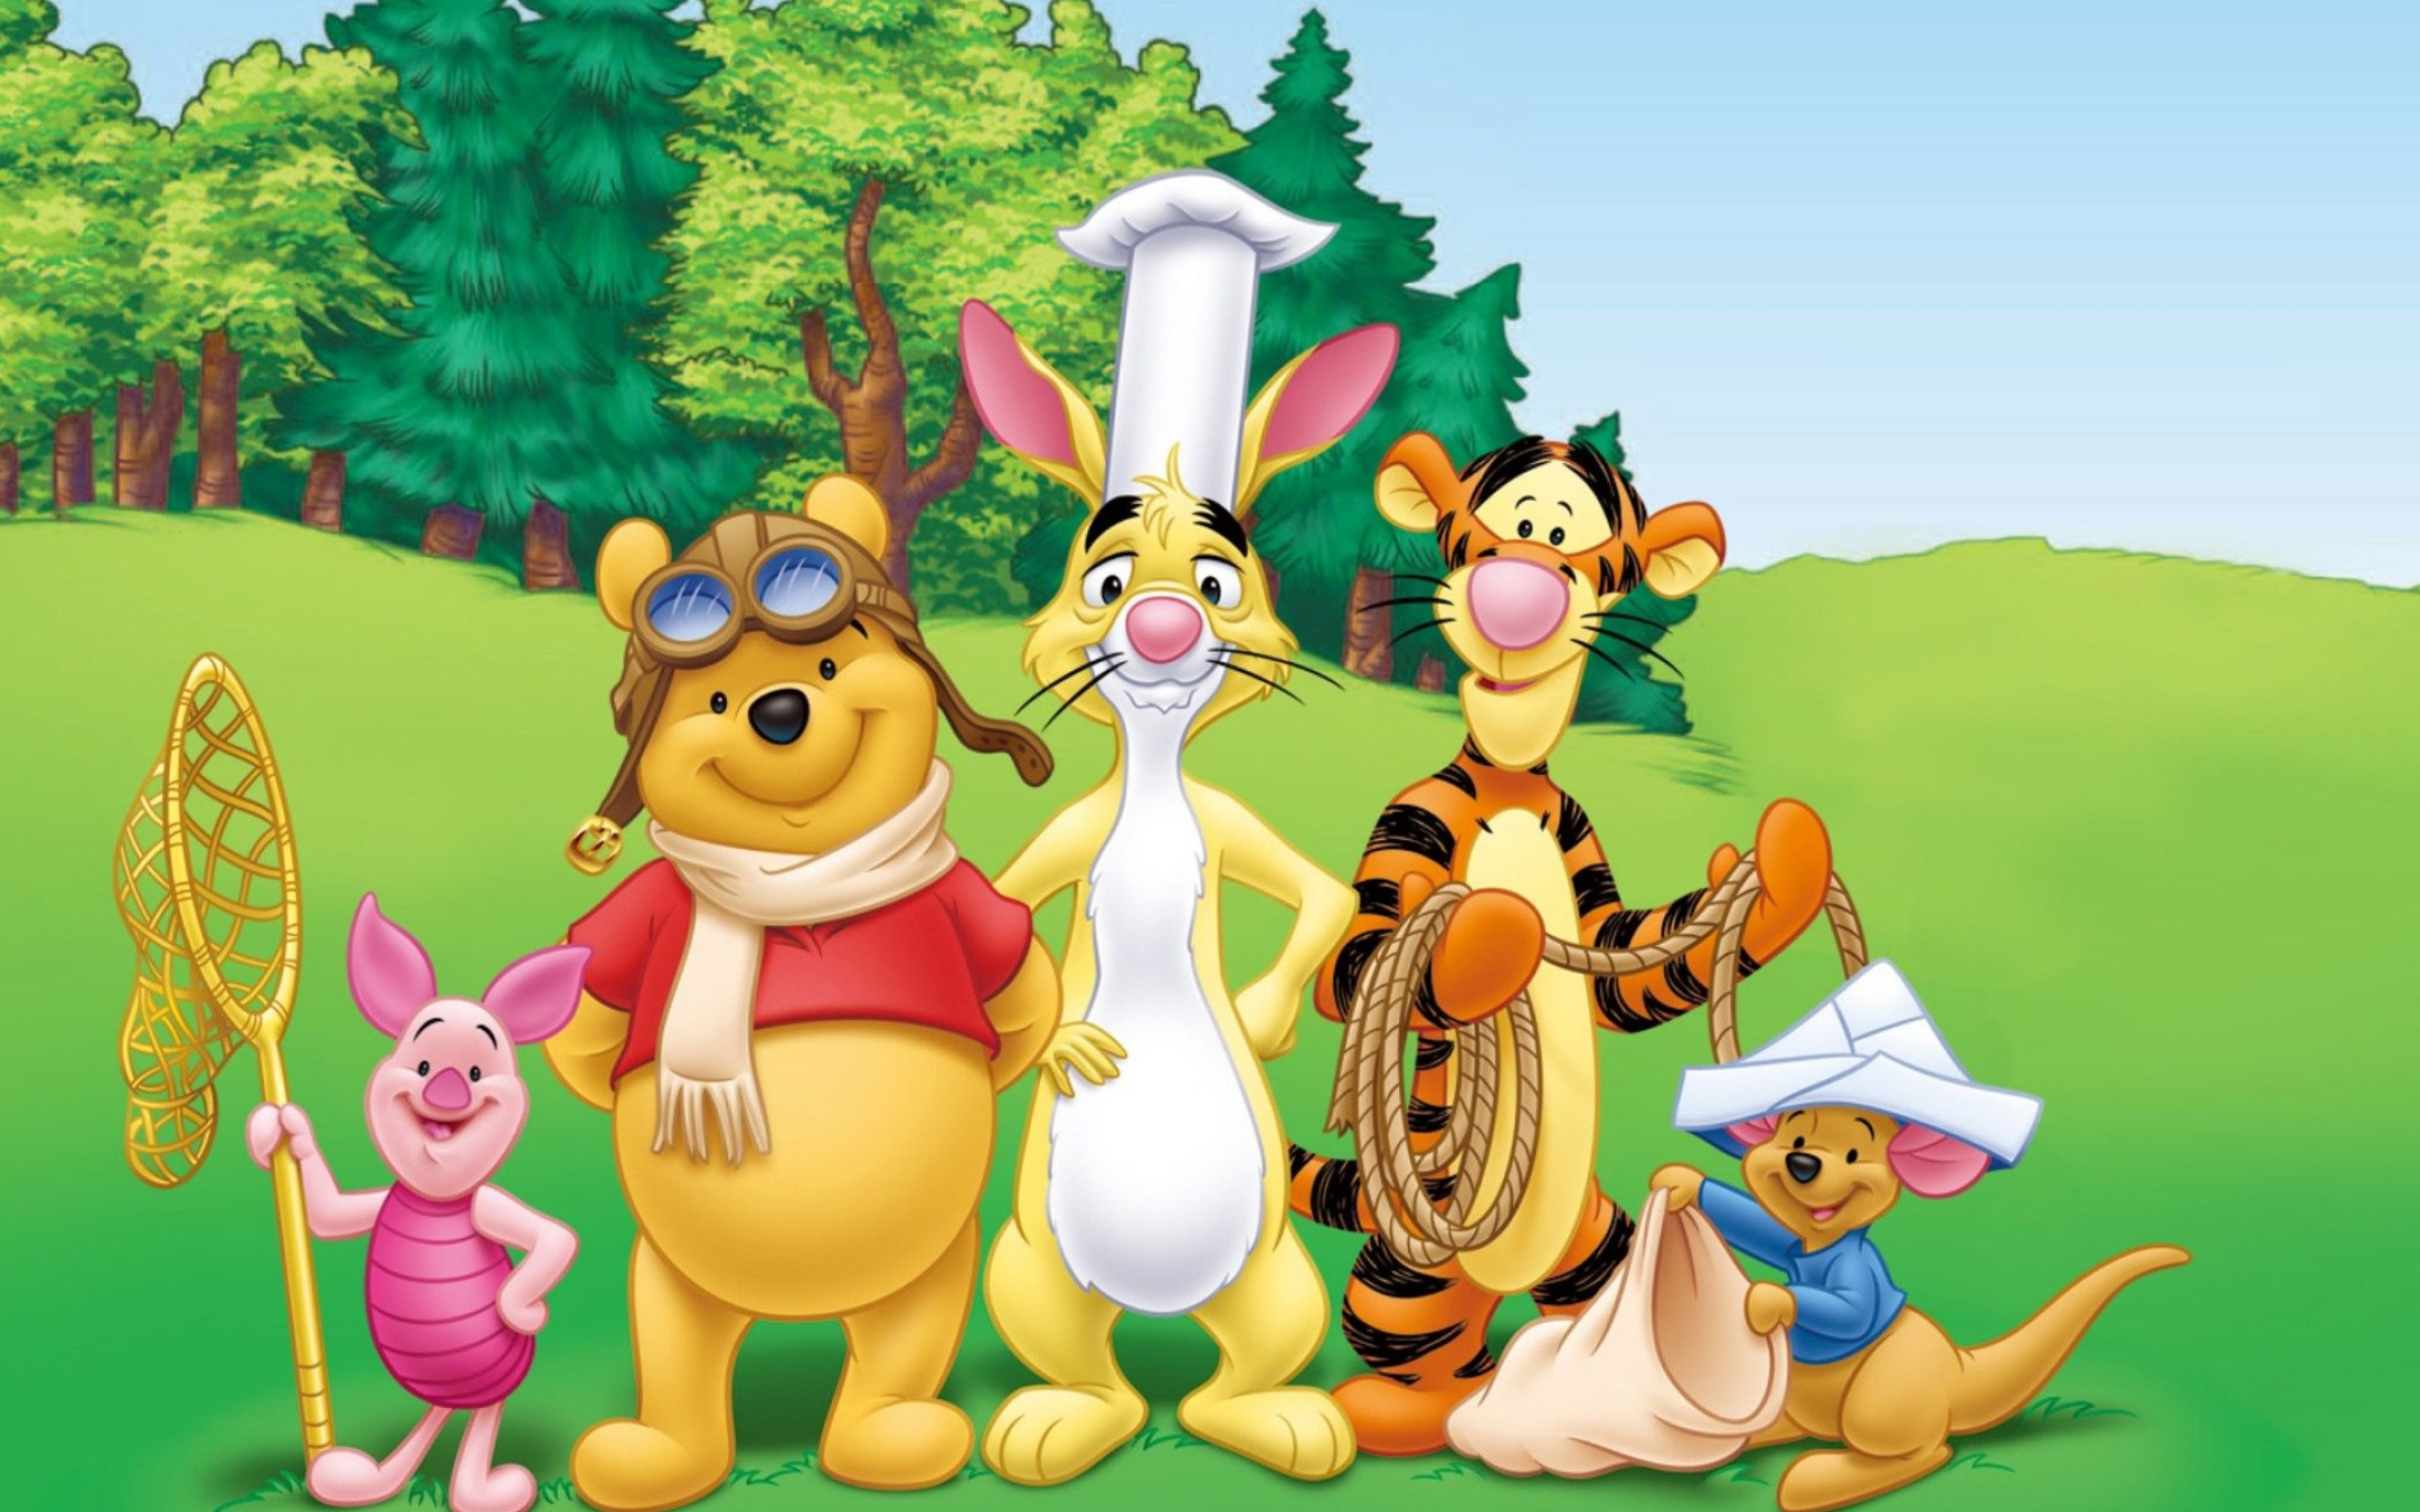 Baby Roo, Winnie-the-Pooh animation, Winnie the Pooh character wallpapers, 2560x1600 HD Desktop